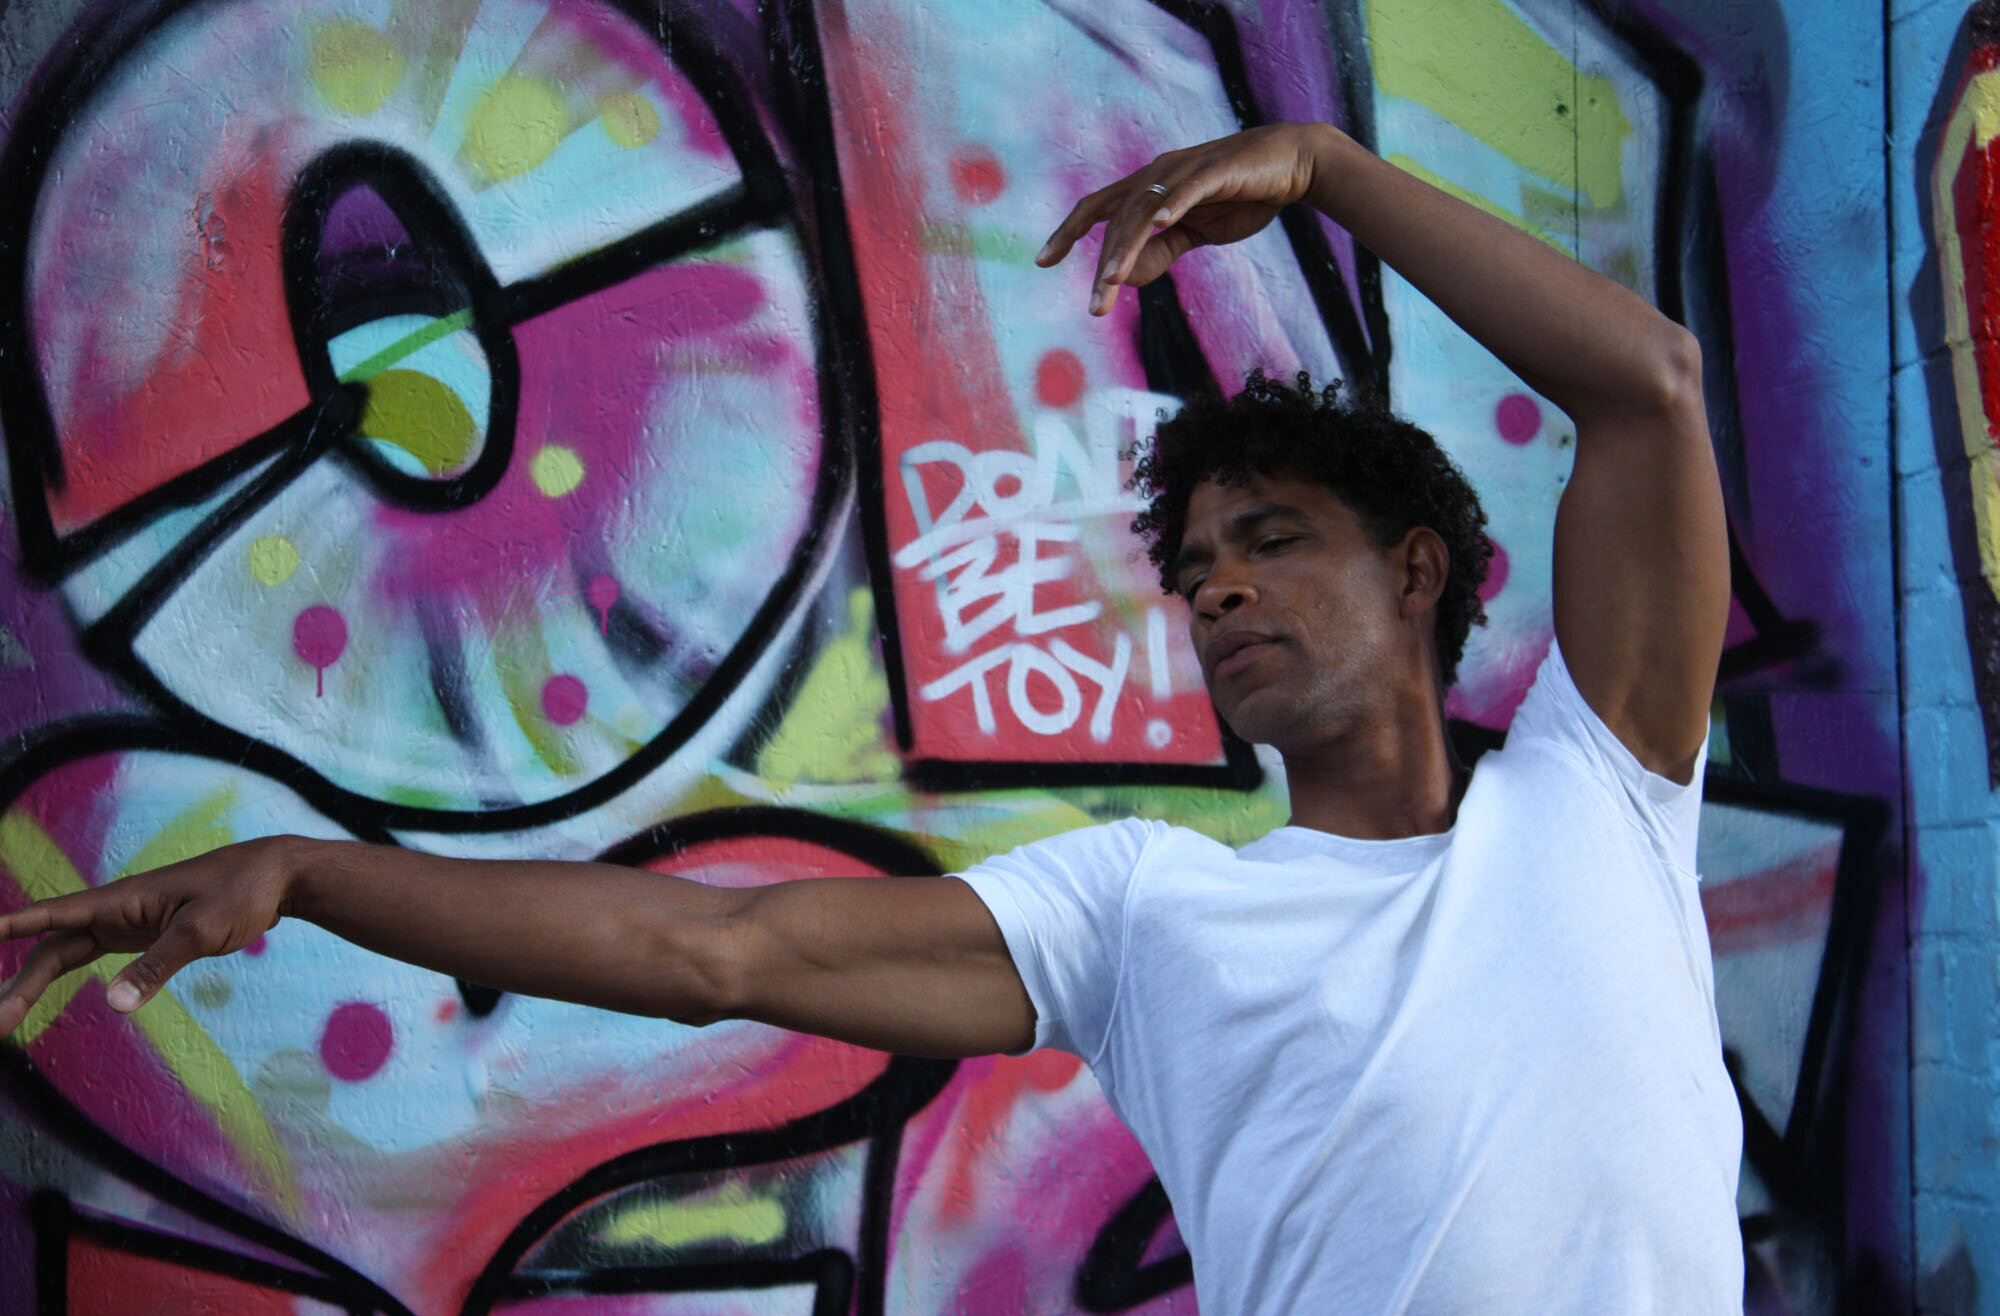 Ballet dancer Carlos Acosta dancing in front of graffiti for the final commission of Sky Arts Portrait Artist of the Year 2020 by Curtis Holder